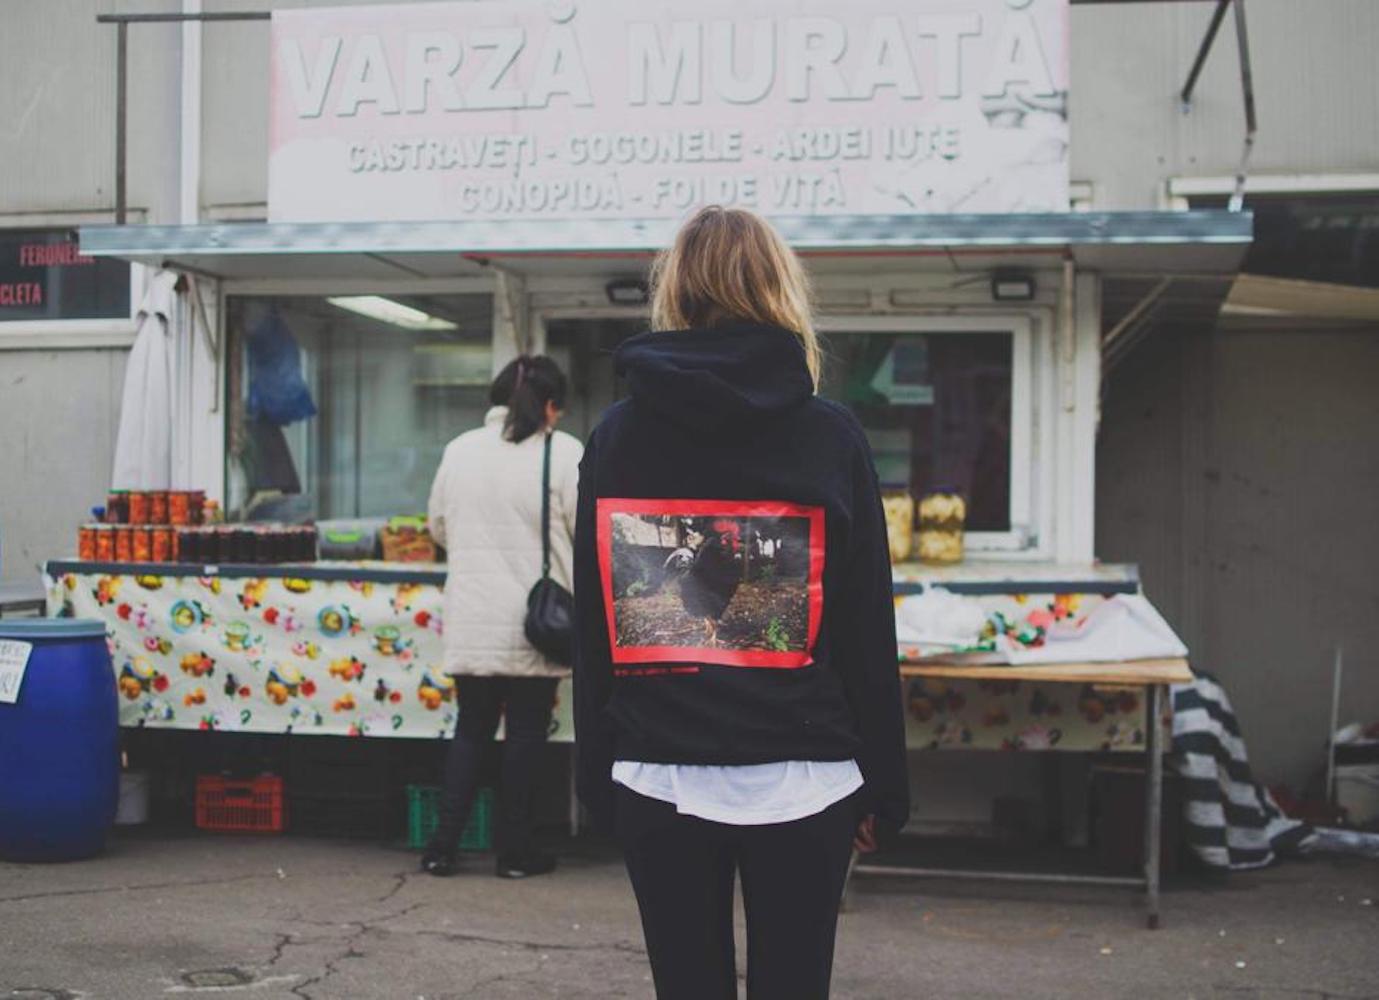 Follow the Romanian brand bringing a slice of country life to city sweatshirts